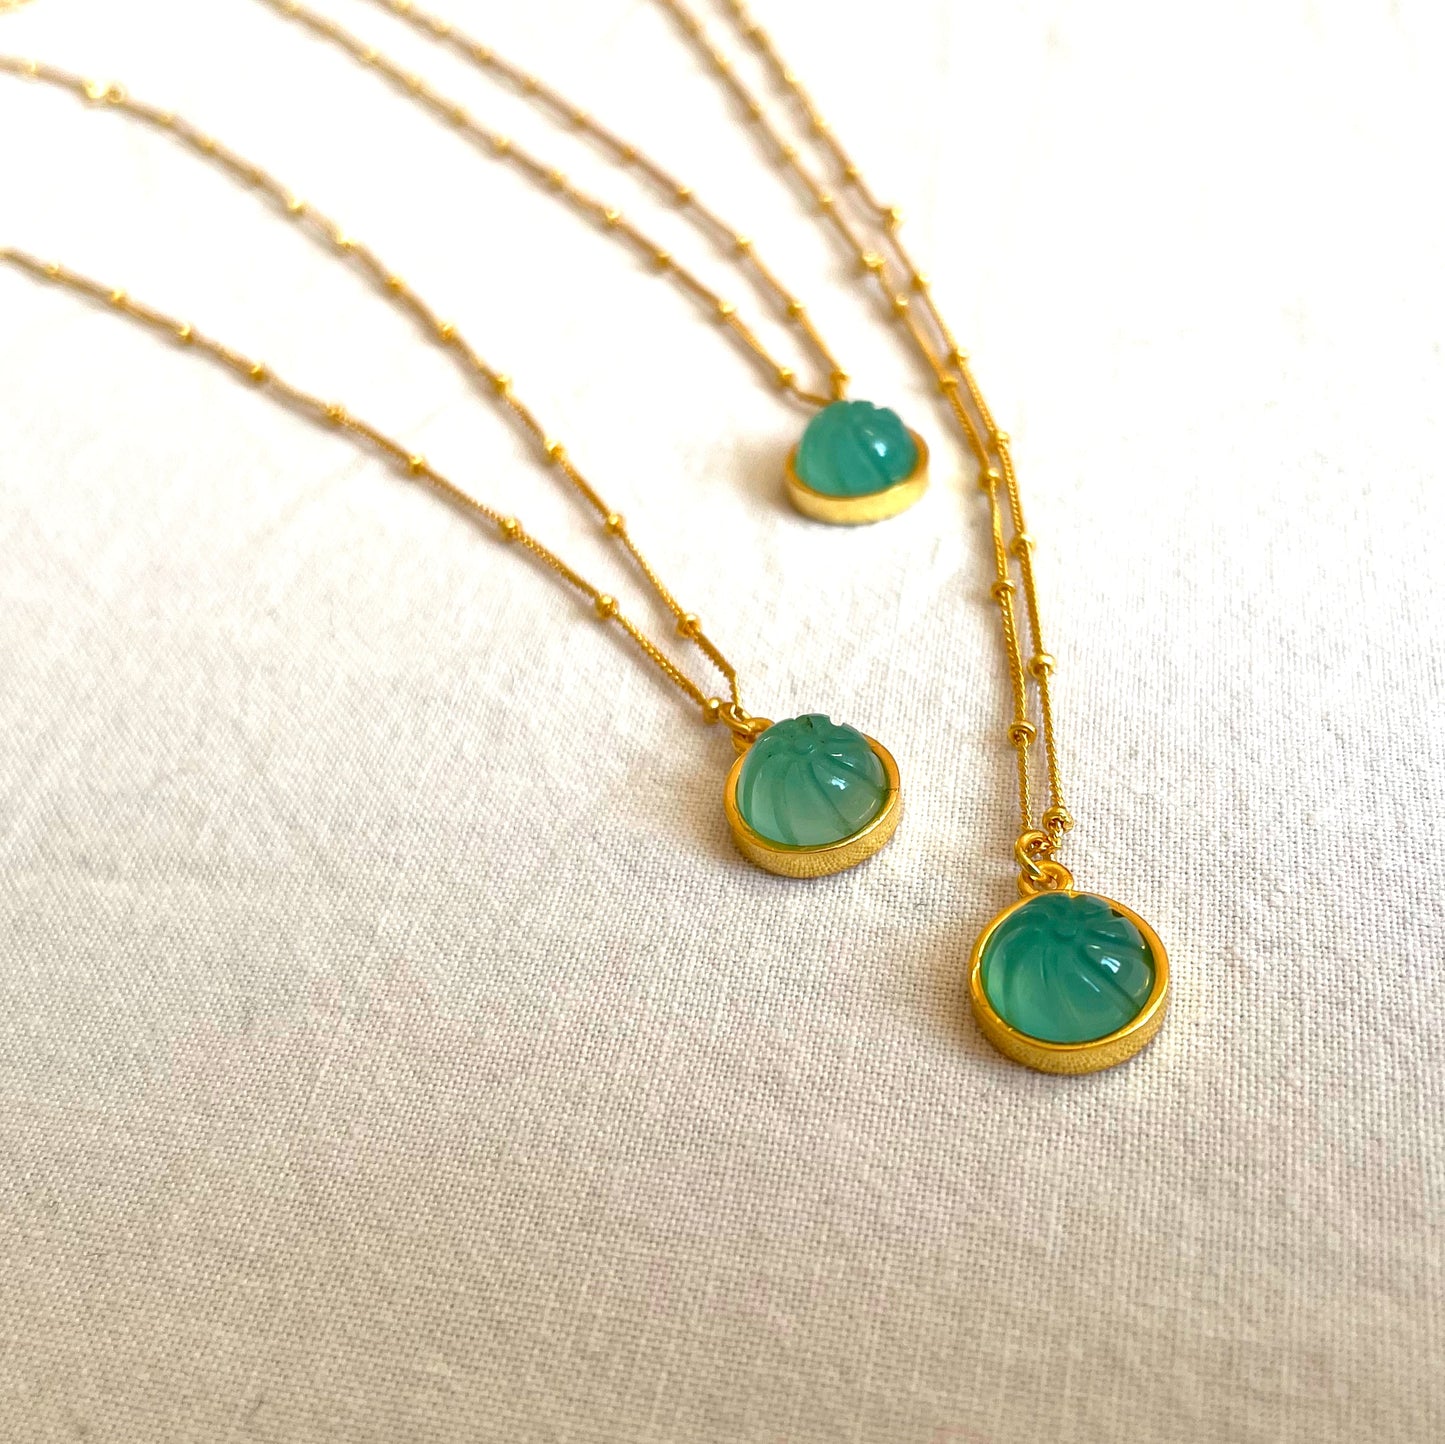 Aqua chalcedony Gold Pendant Necklace, Turquoise Pendant Necklace, Gold Plated on 925 Sterling Silver, handmade gemstone necklace, Gift, turquoise necklace, gemstones, gold chain, Crystal, mothers day gift, small business, london, dainty necklace